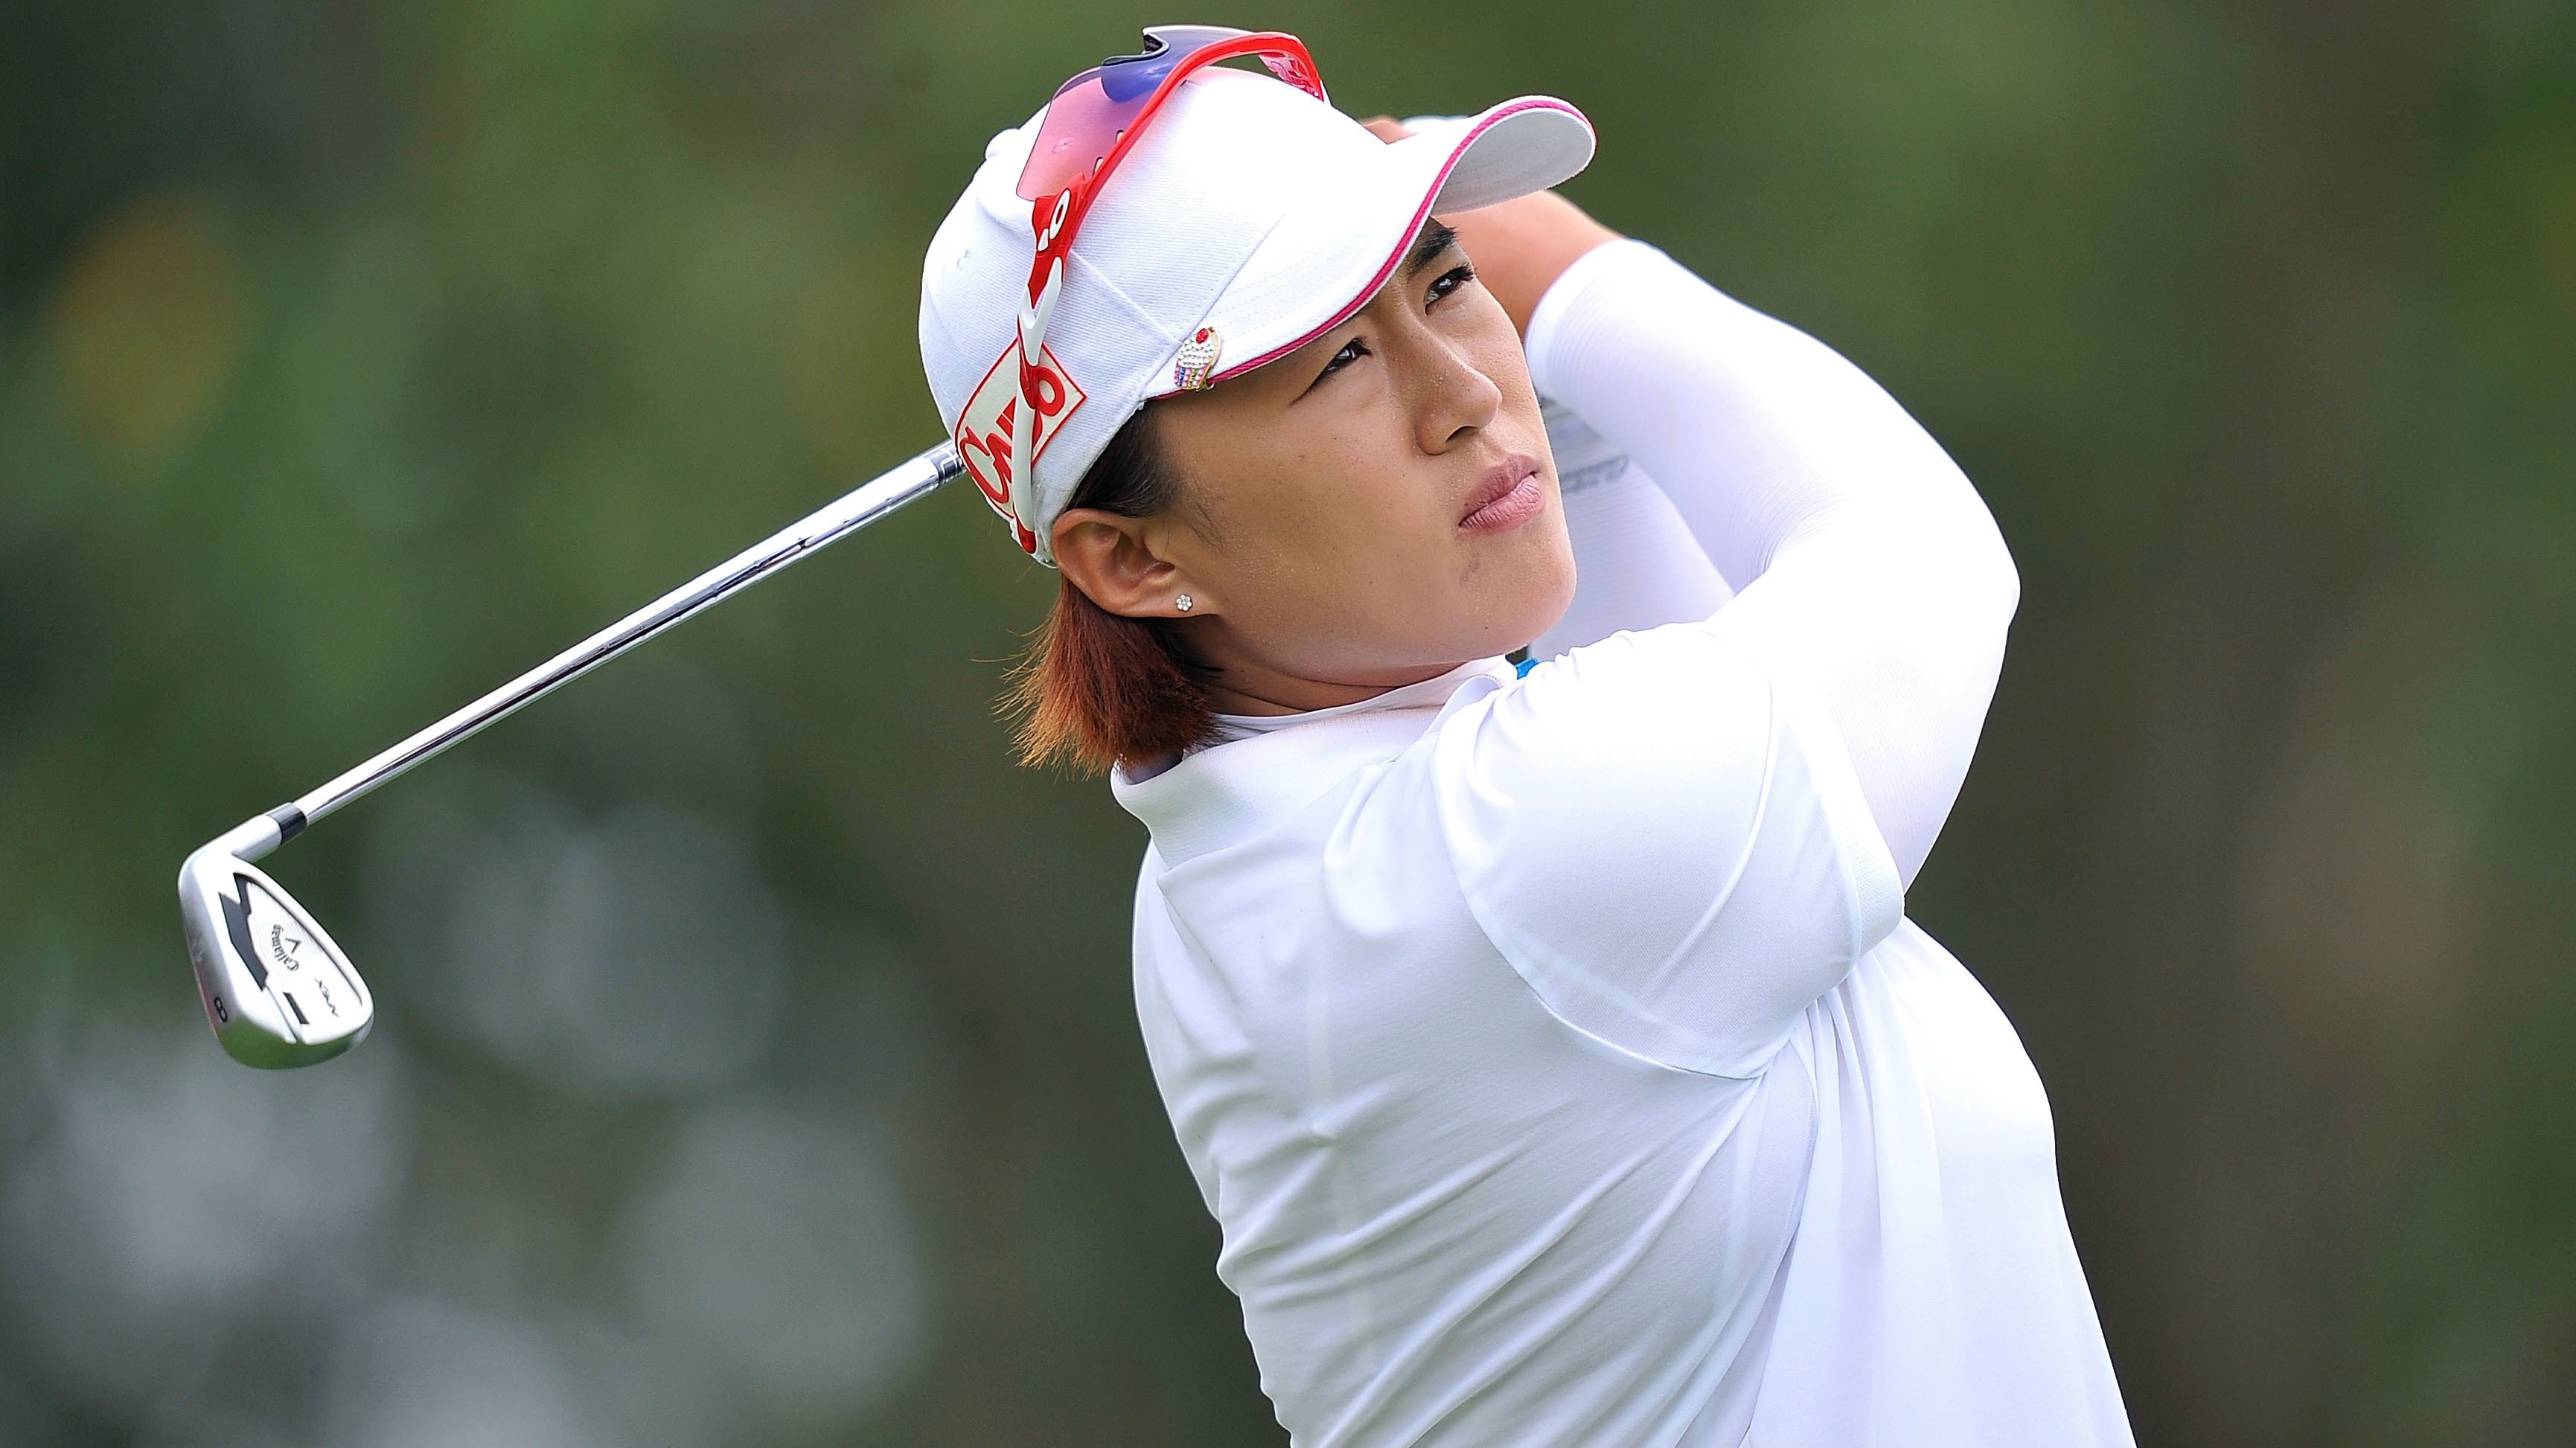 Amy Yang of South Korea plays a shot during day four of the 2015 LPGA Thailand at Siam Country Club